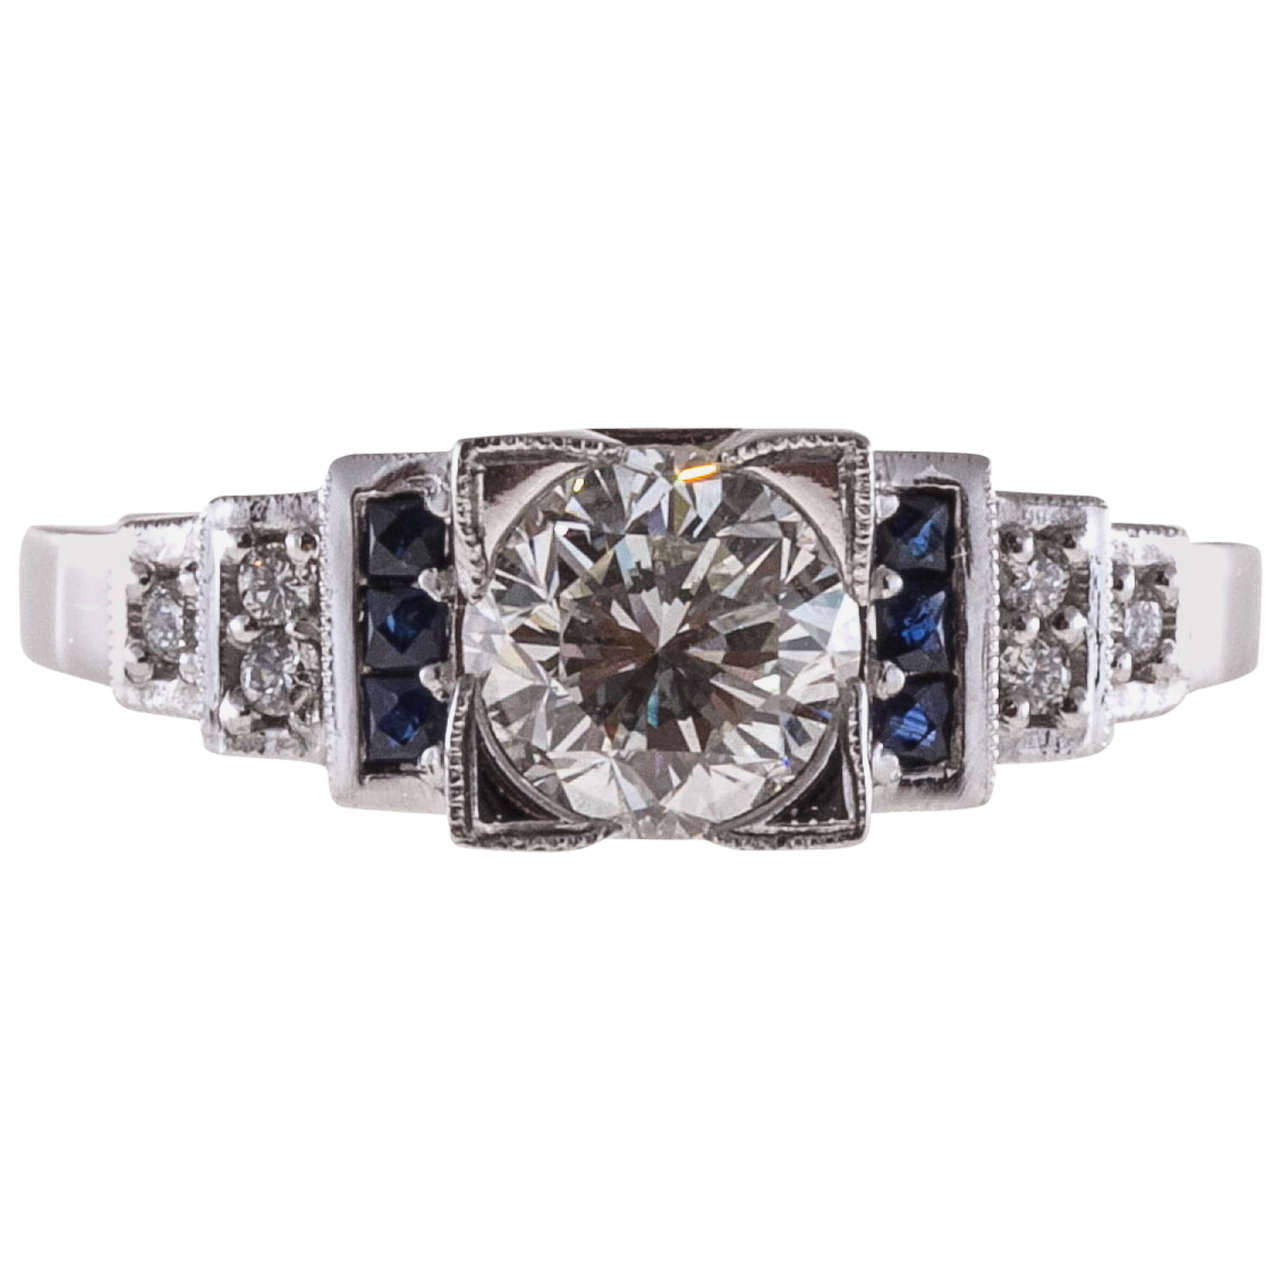 Old European cut diamond and round sapphire engagement ring. GIA certified white face up and very bright because of the cut. The platinum setting is a custom made Peter Suchy design.

1 old European cut round diamond, approx. total weight 1.00cts, I